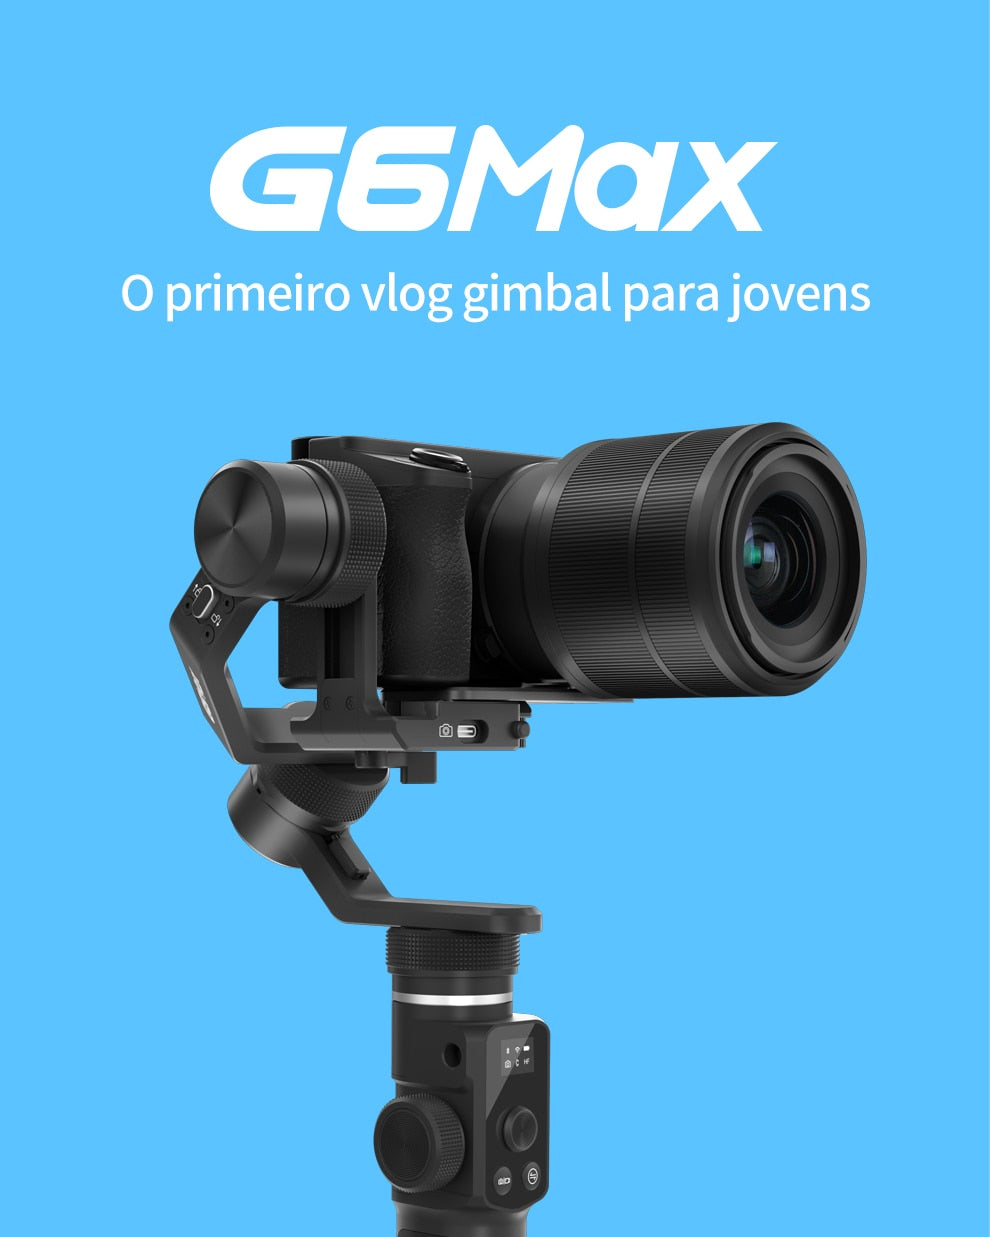 FeiyuTech G6 MAX All-in-One Gimbal Stabilizer 3-Axis Handheld Universal Smartphone Sony RX0 ZX-1 Mirrorless DSLR Action Camera